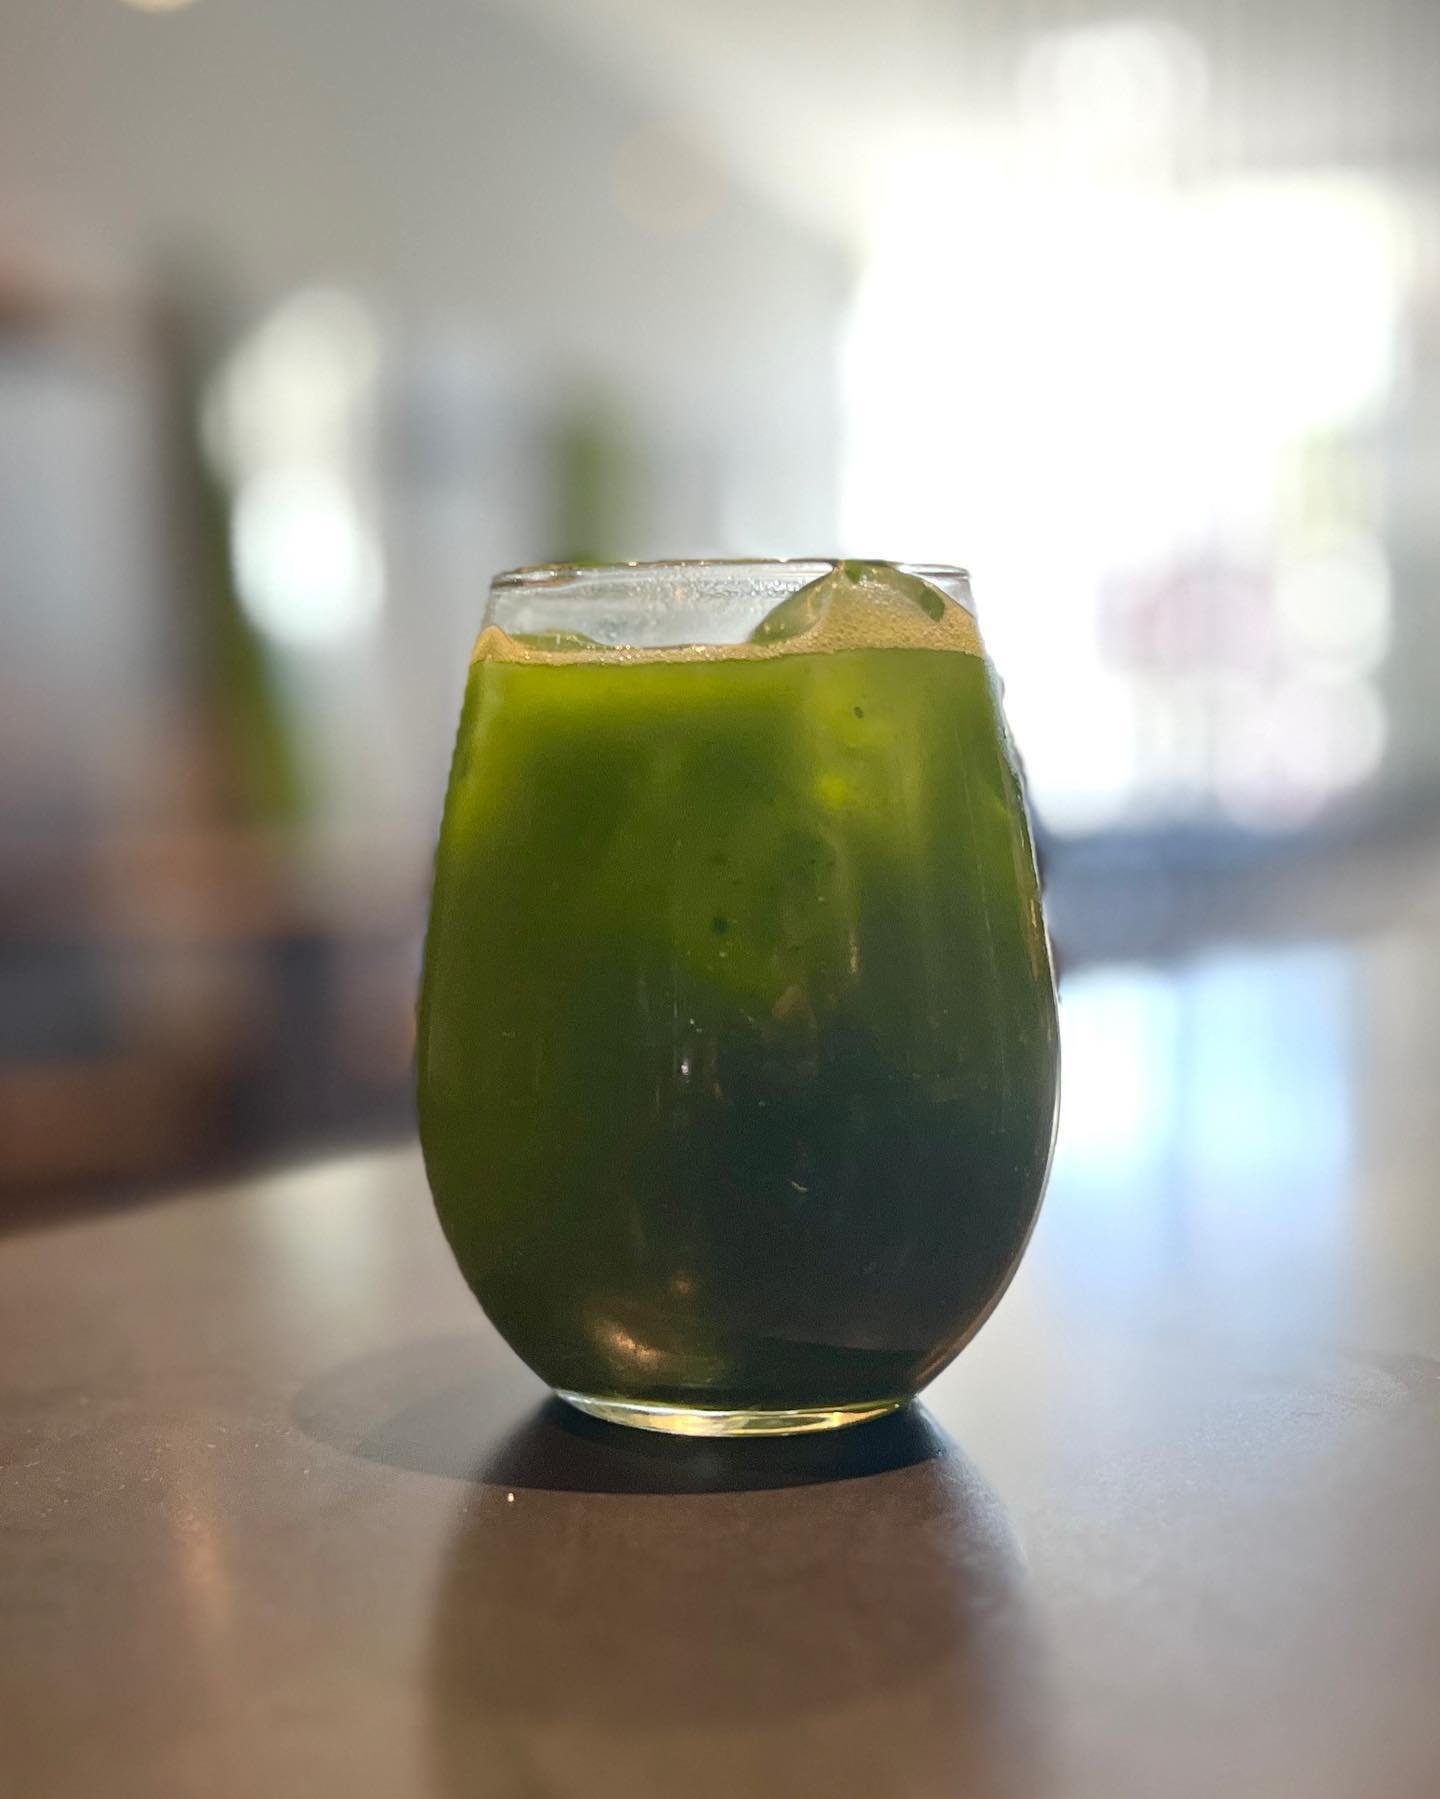 Matcha Lemonade. 

This is one you&rsquo;ve got to try, even if you think you aren&rsquo;t a matcha person! We&rsquo;re squeezing fresh lemons to make a delicious lemonade, and we&rsquo;ve paired it with a beautiful vibrant and fresh tasting matcha f